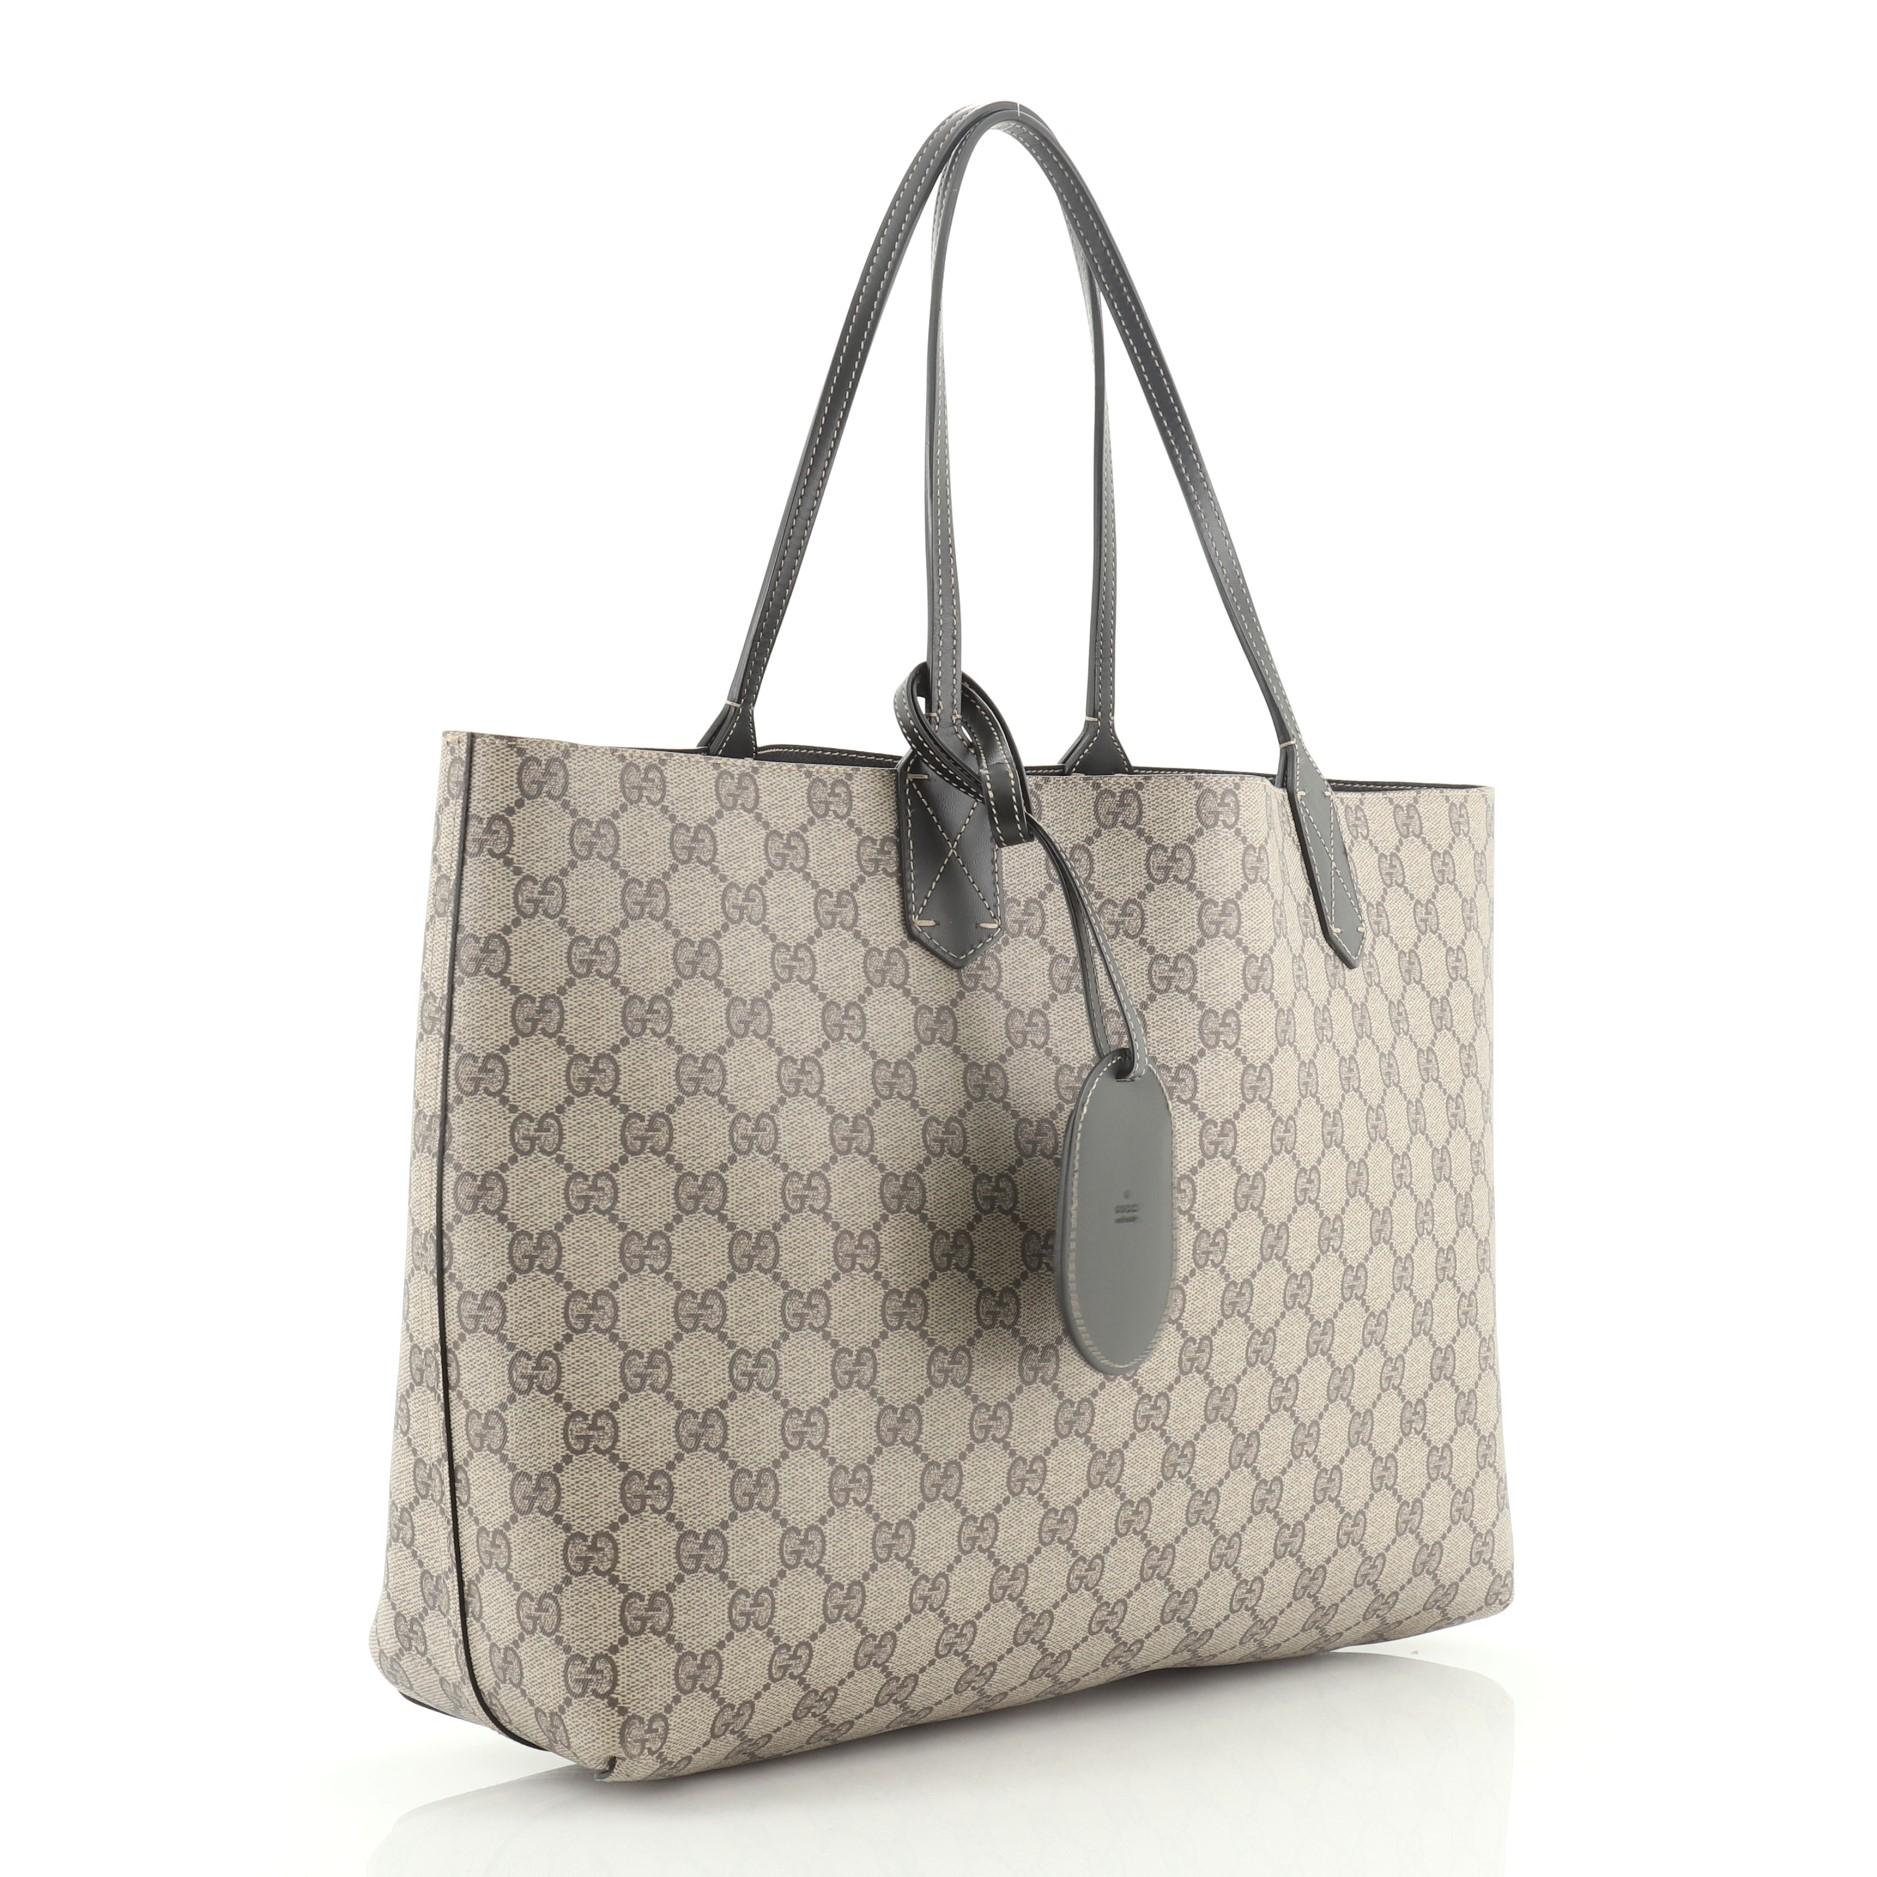 This Gucci Reversible Tote GG Print Leather Large, crafted from brown GG print leather, features dual flat leather handles. It opens to a reversible black leather interior. 

Condition: Excellent. Minor scuffs on handle wax edges, scratches on